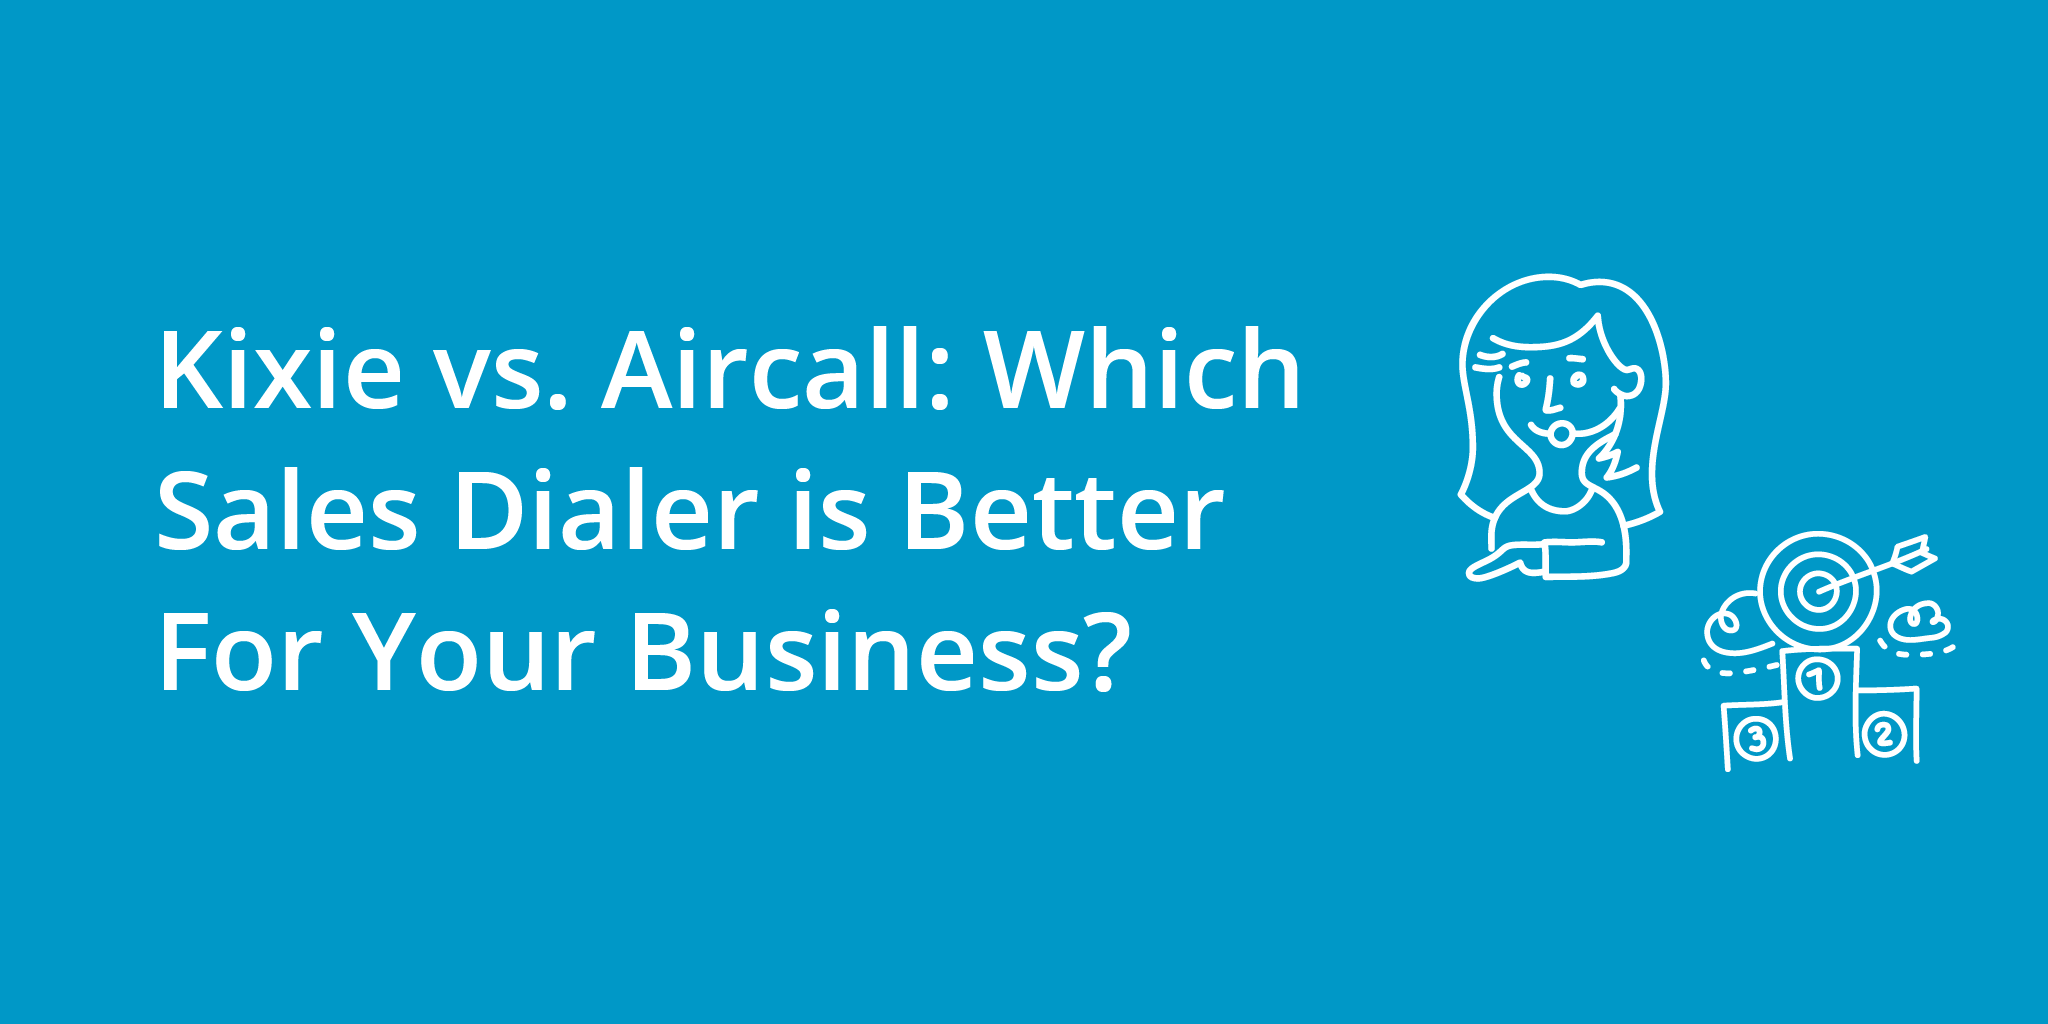 Kixie vs. Aircall: Which Sales Dialer is Better For Your Business?